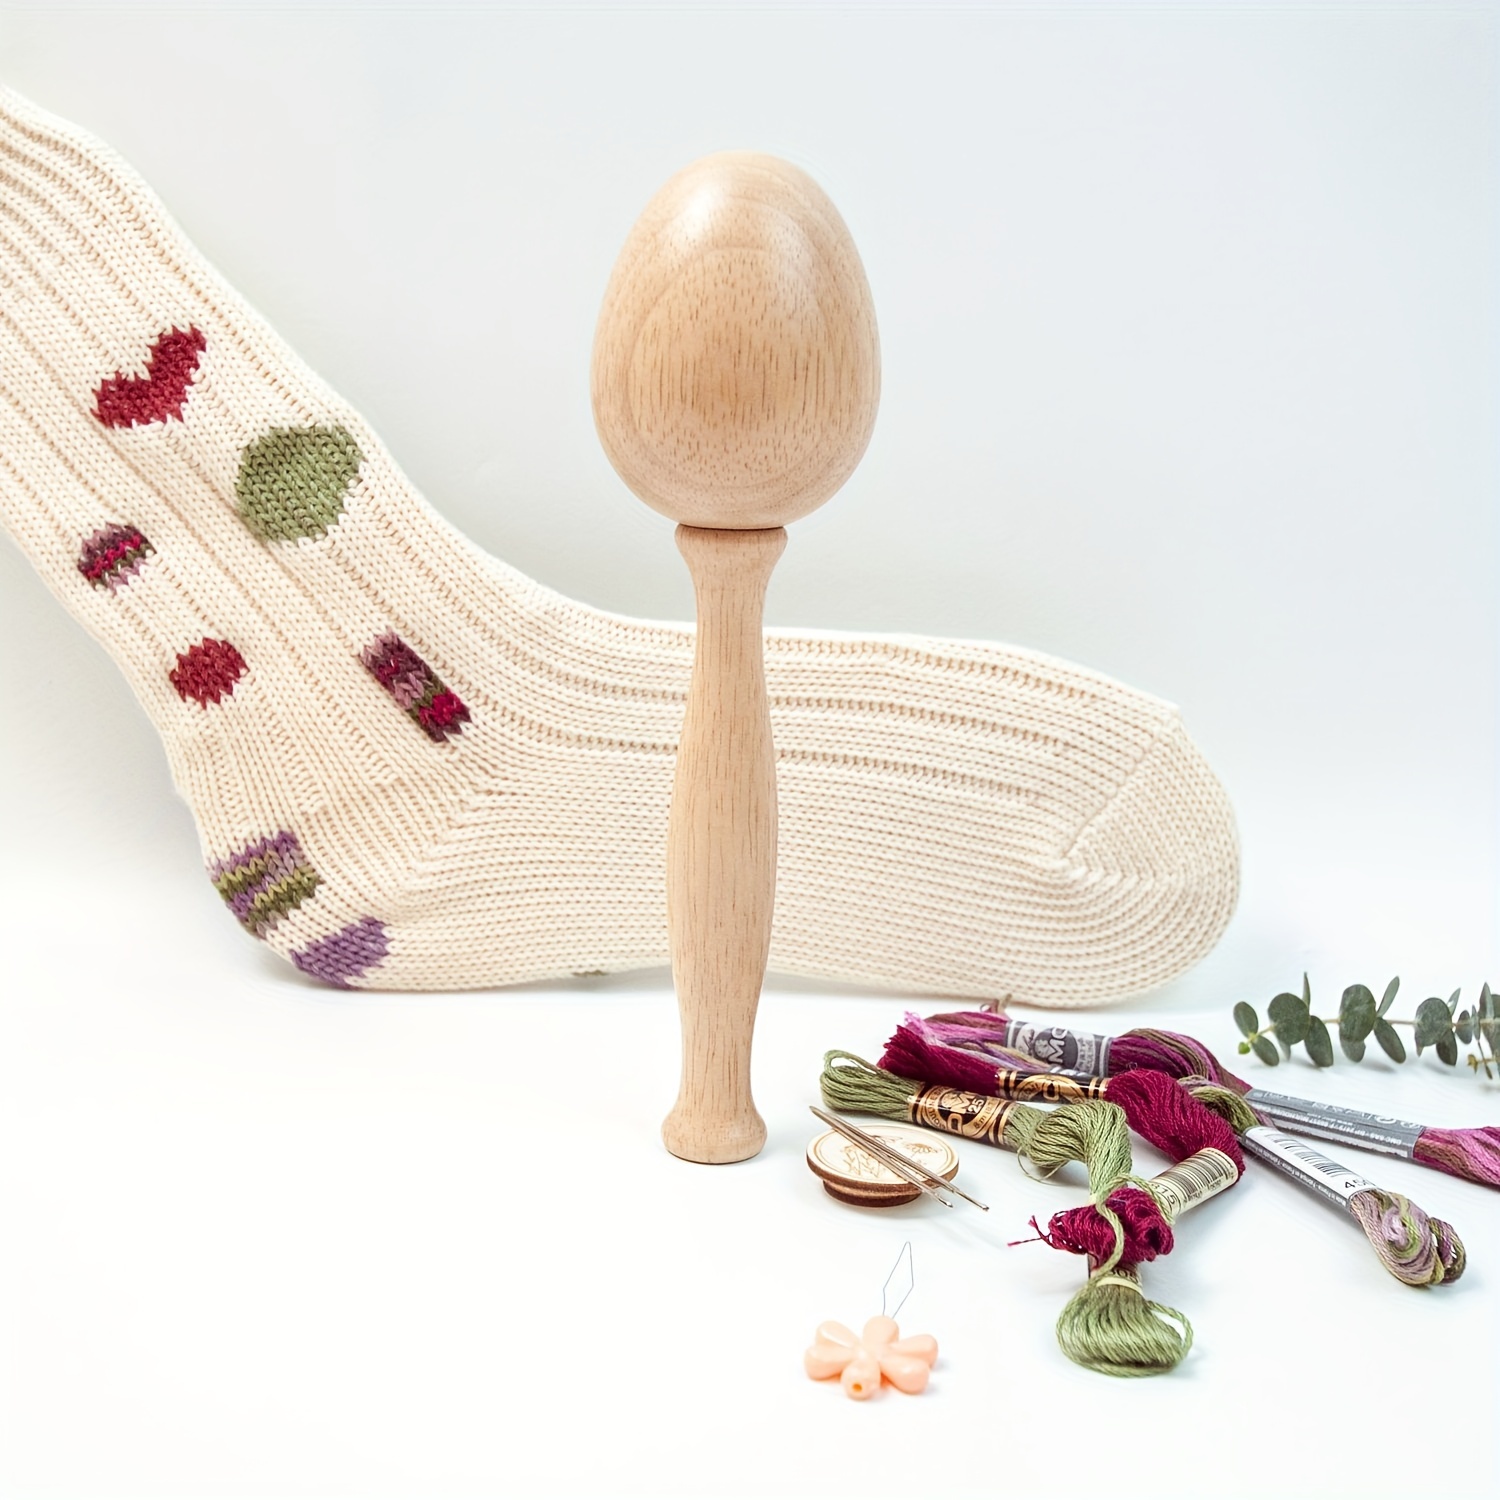 Darning Kit Wooden Darning Needle Set Darning Egg With Handle For  Hand-Sewing Patching Mending Socks Sweaters And Knits